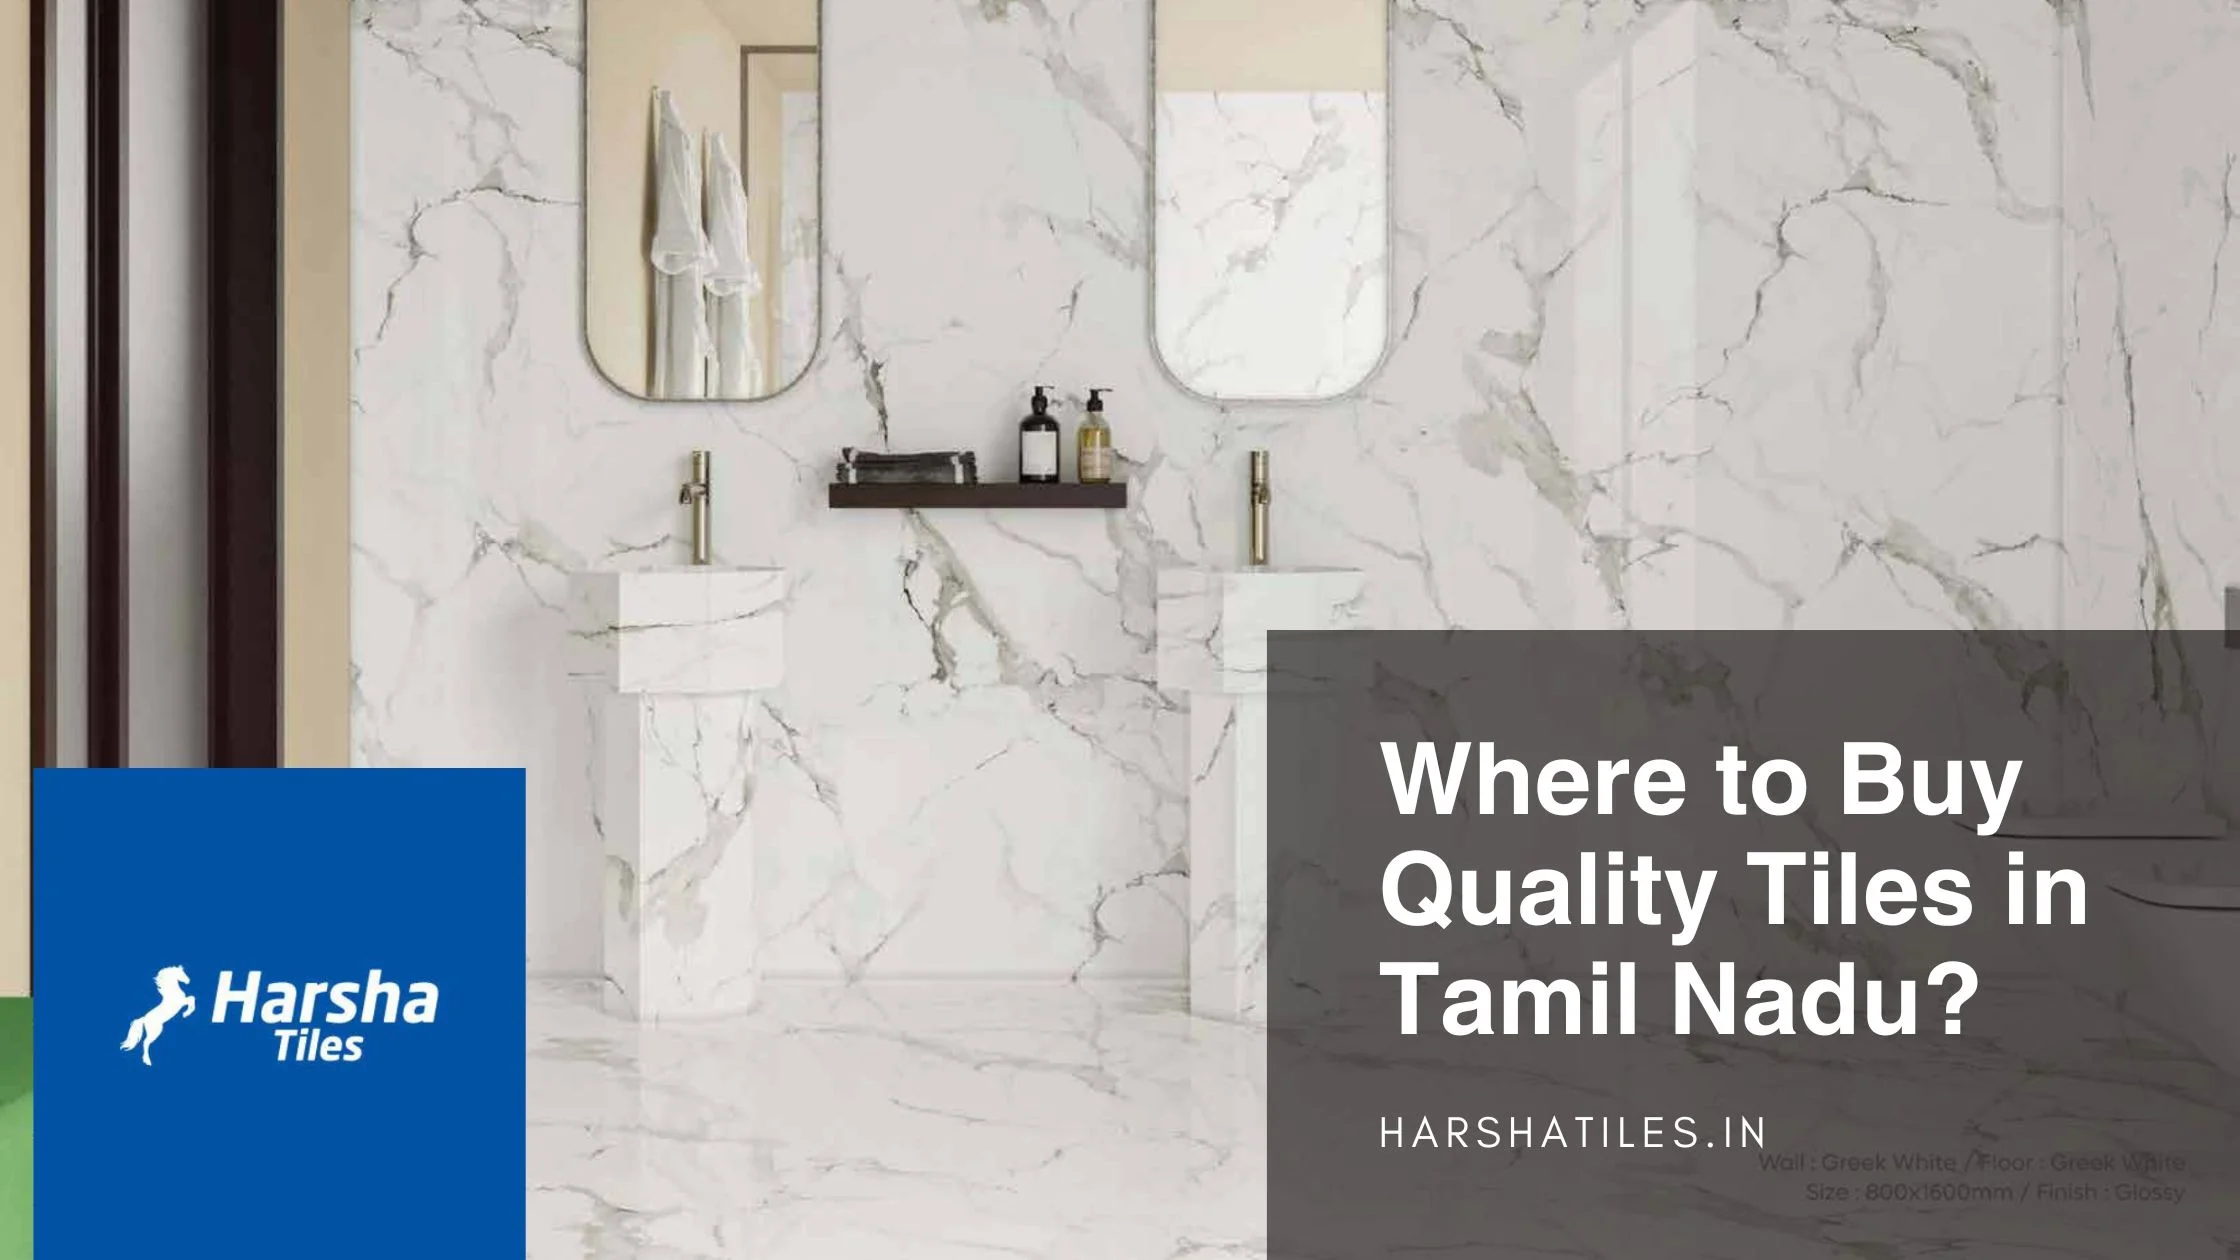 Where to Buy Quality Tiles in Tamil Nadu?